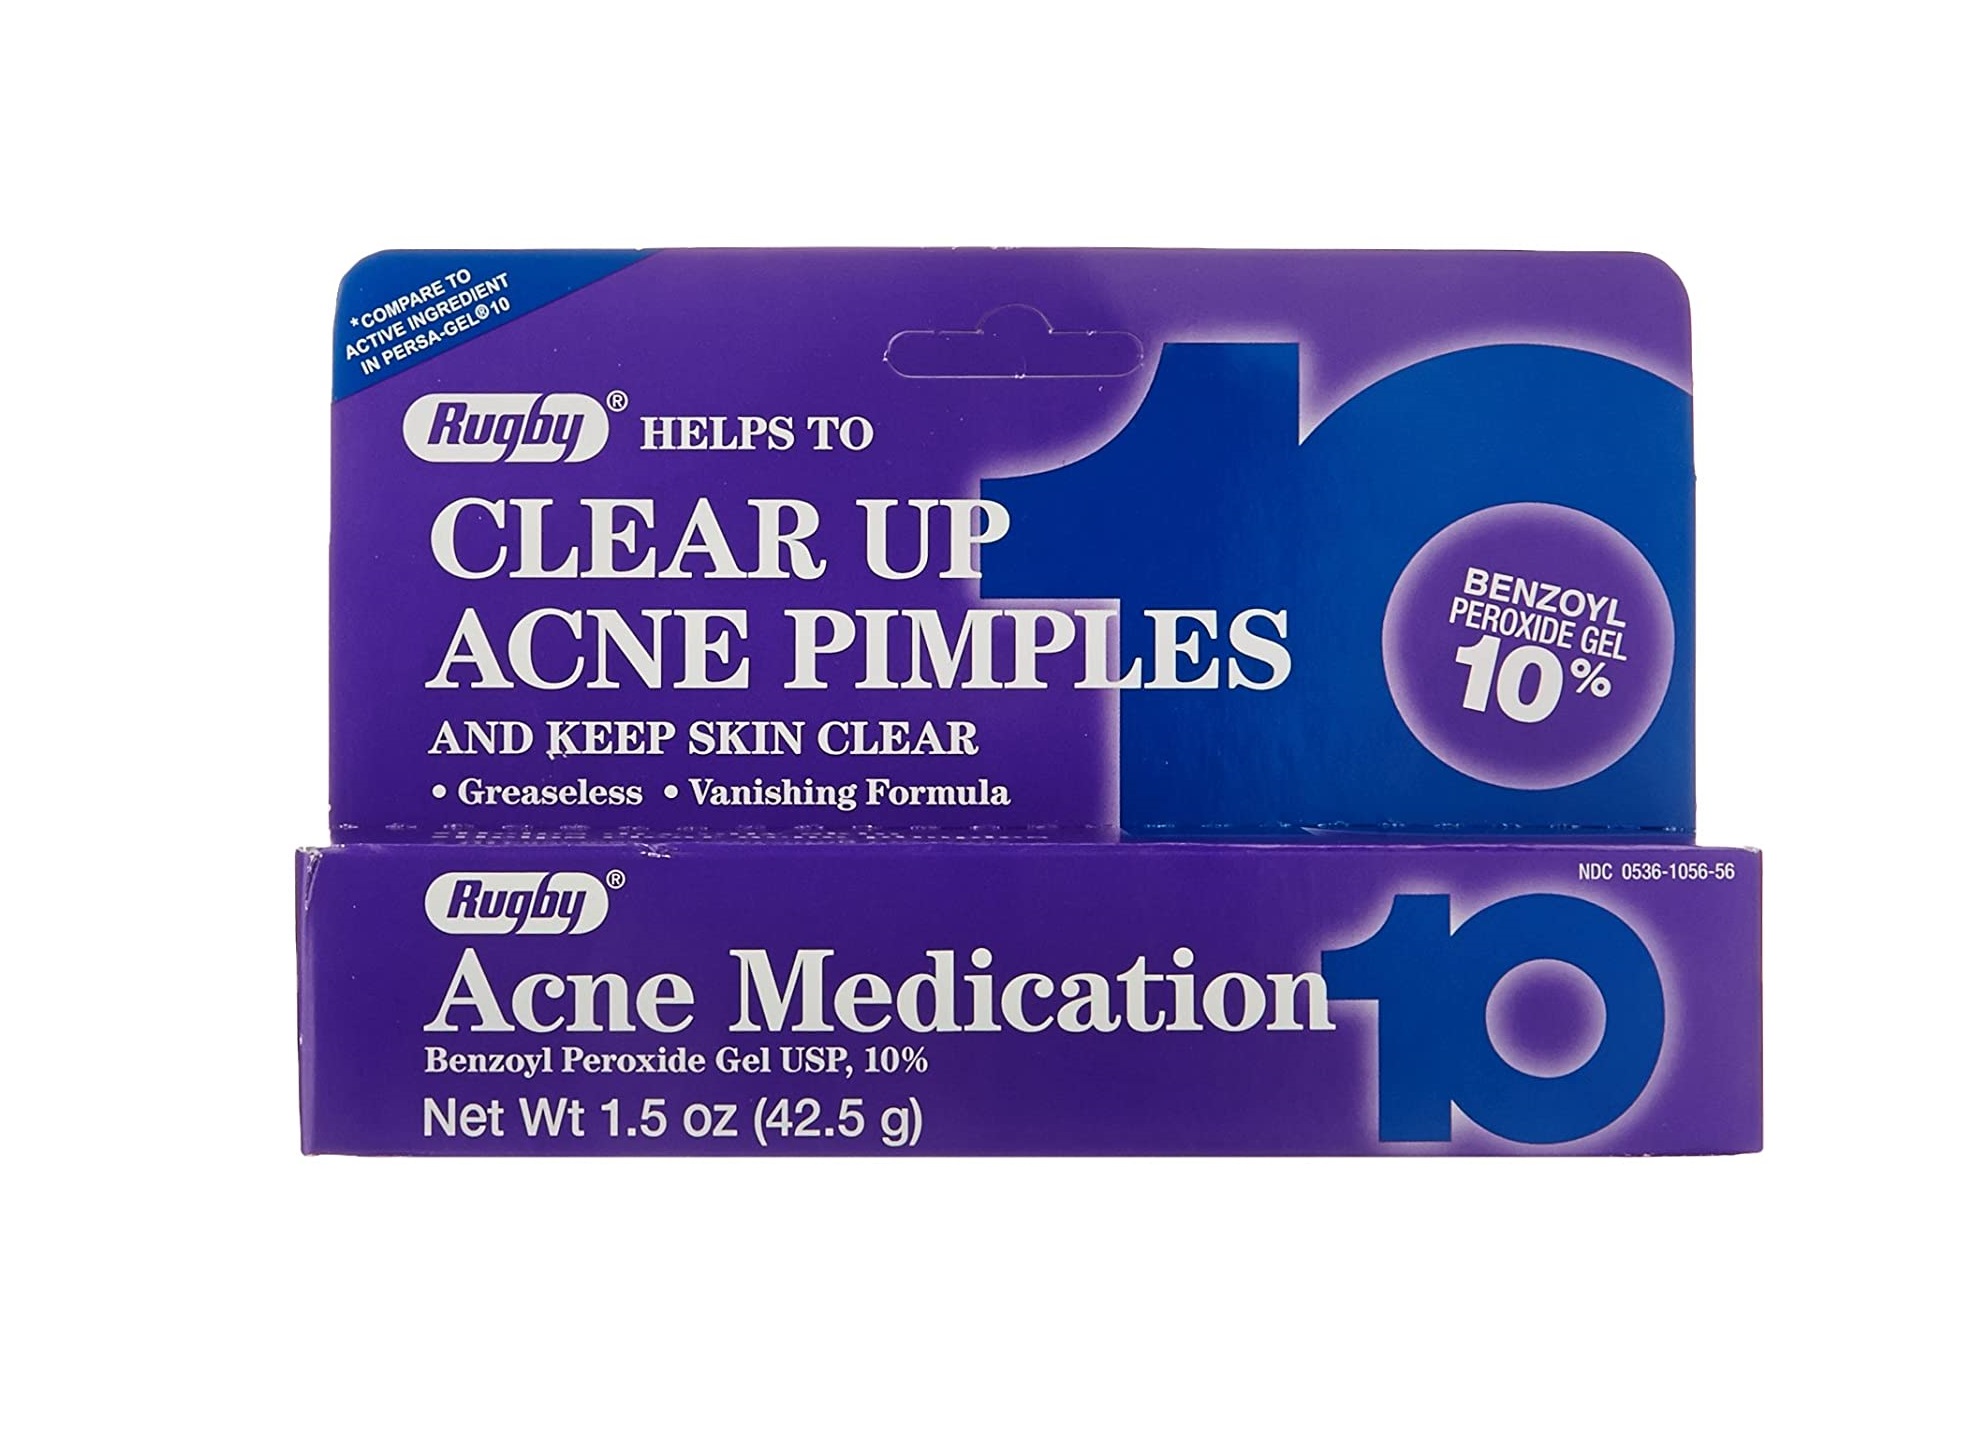 rugby 10 acne pinmple medication 10% benzoyl peroxide